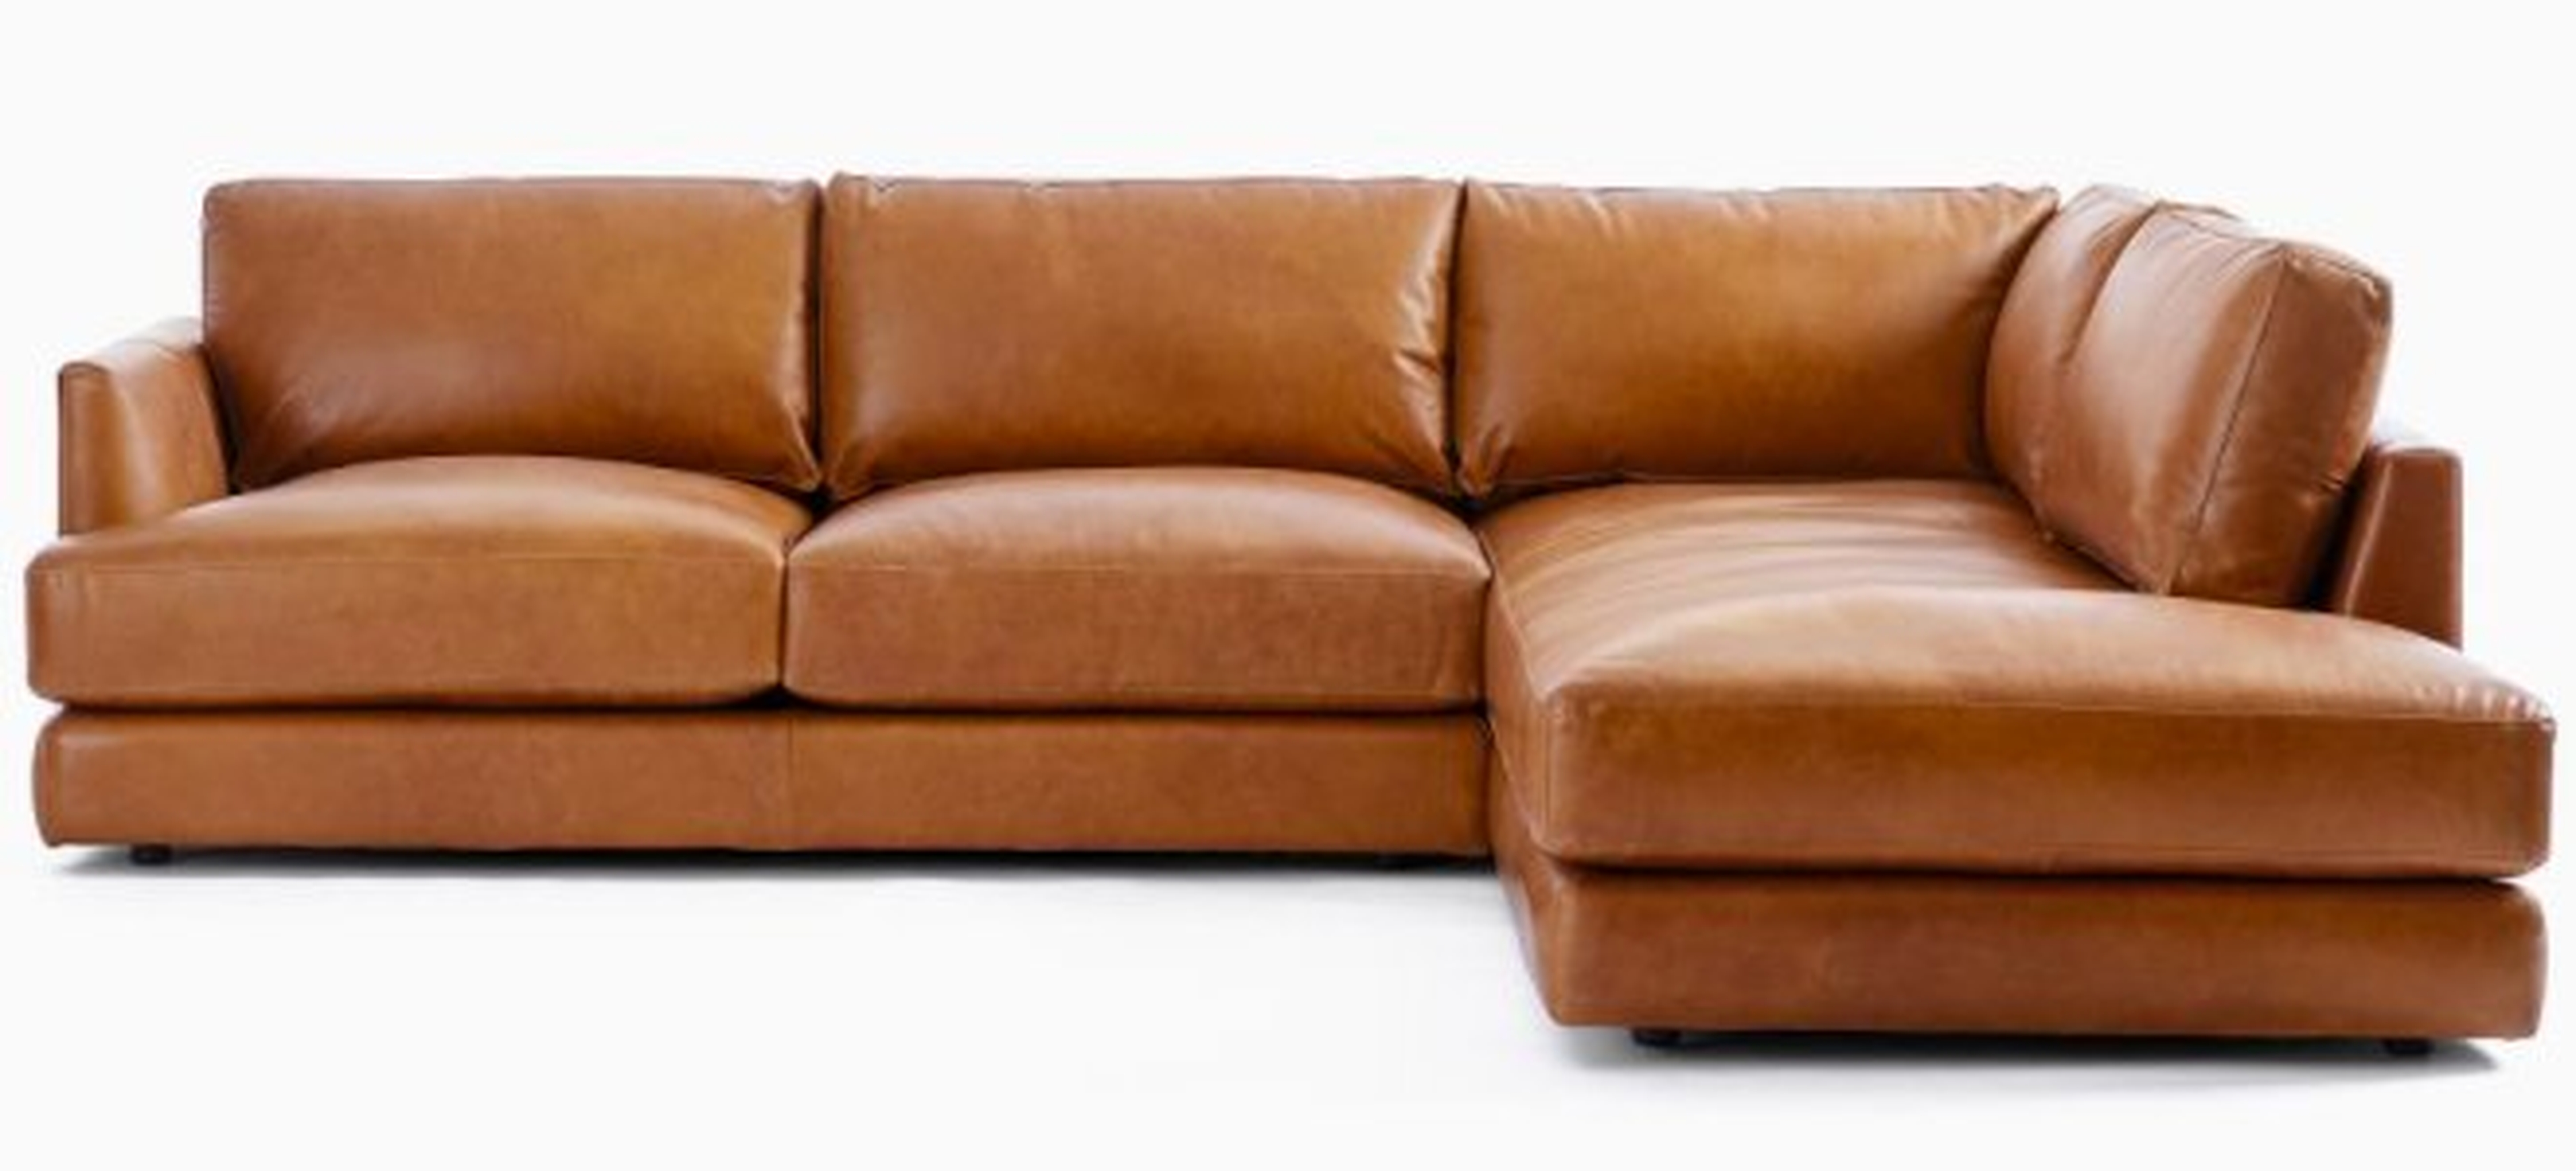 Haven Leather 2-Piece Bumperl Chaise Sectional (RIGHT SIDE CHAISE) - West Elm